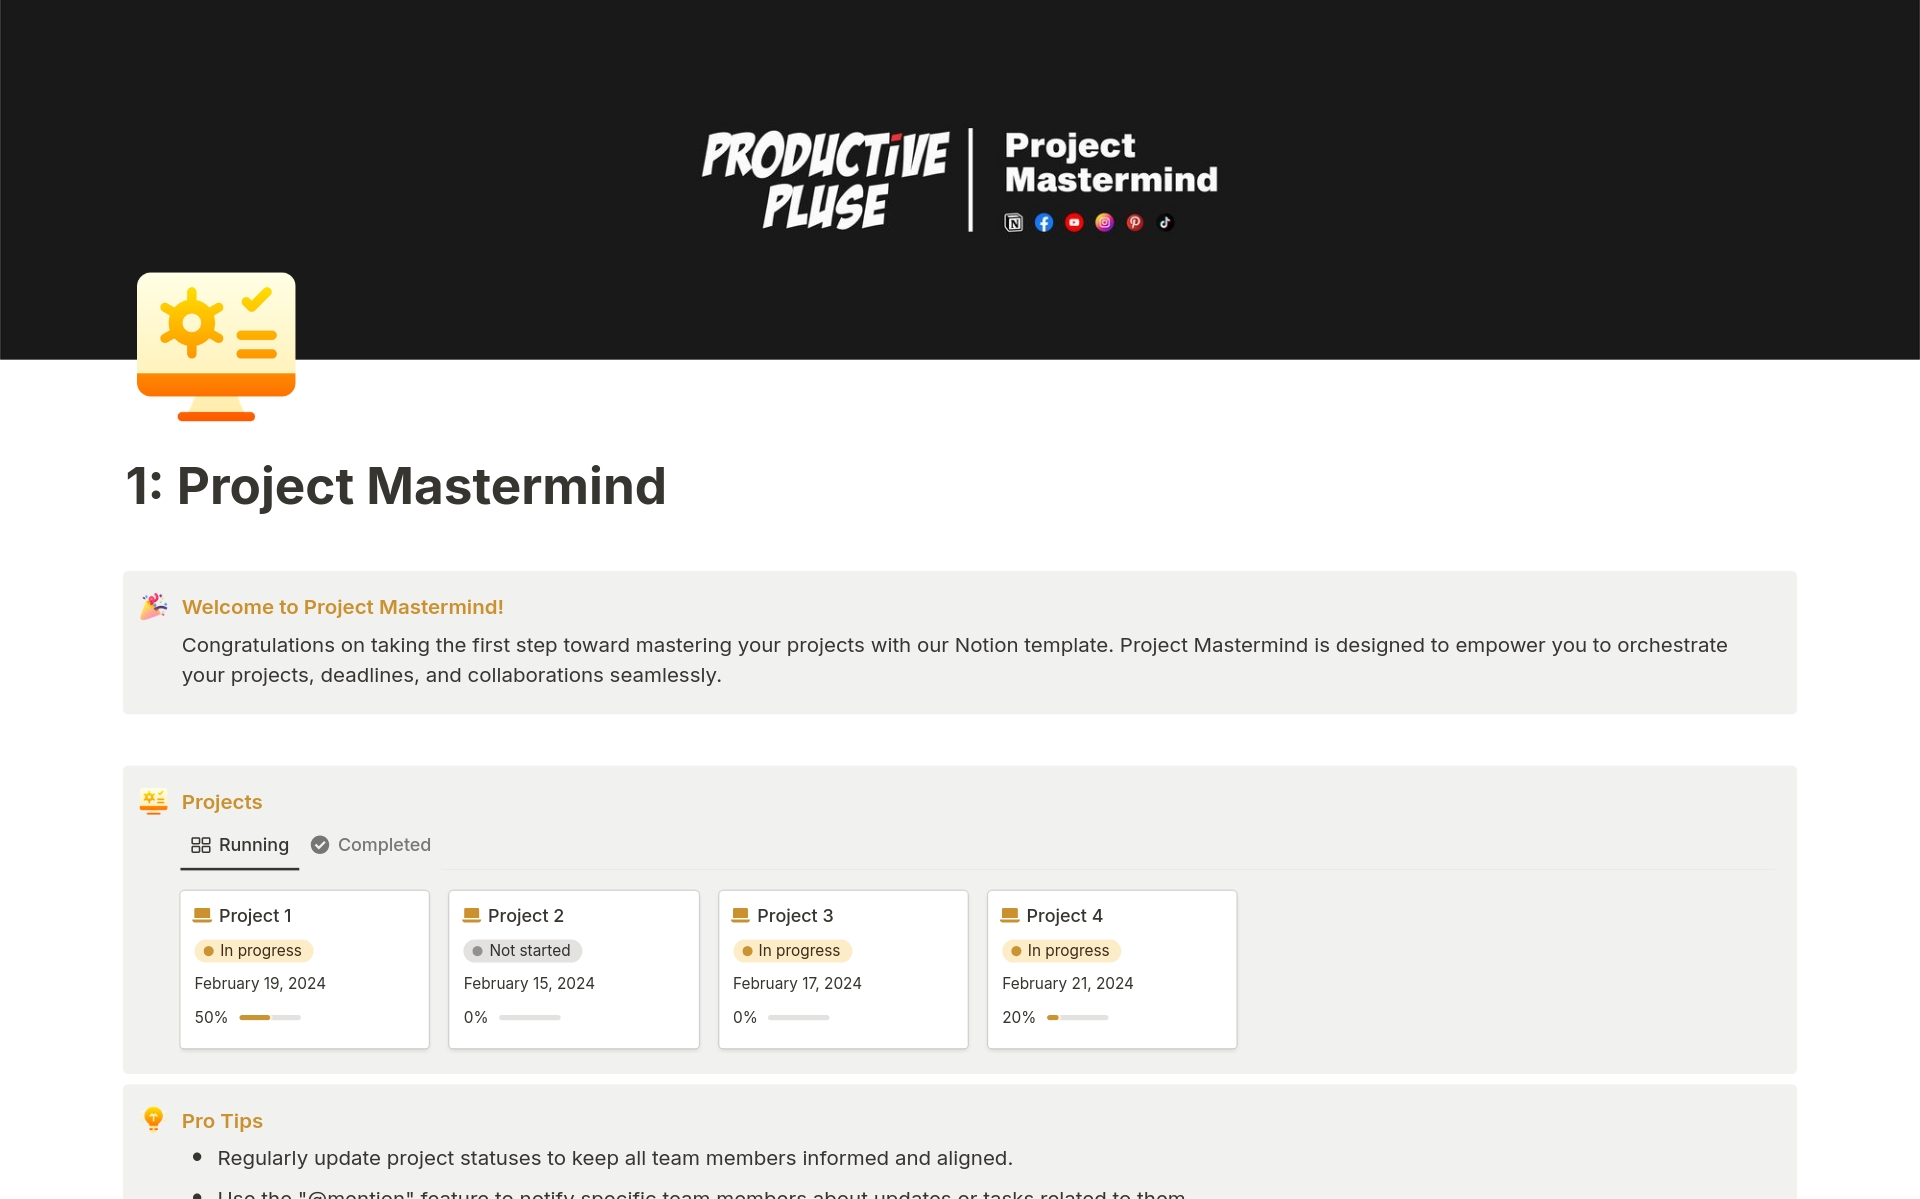 Project Mastermind is a versatile template that enables you to effortlessly create countless projects and store project details for a lifetime. Experience seamless customization with project status, automatic progress bars, timelines, project information etc.